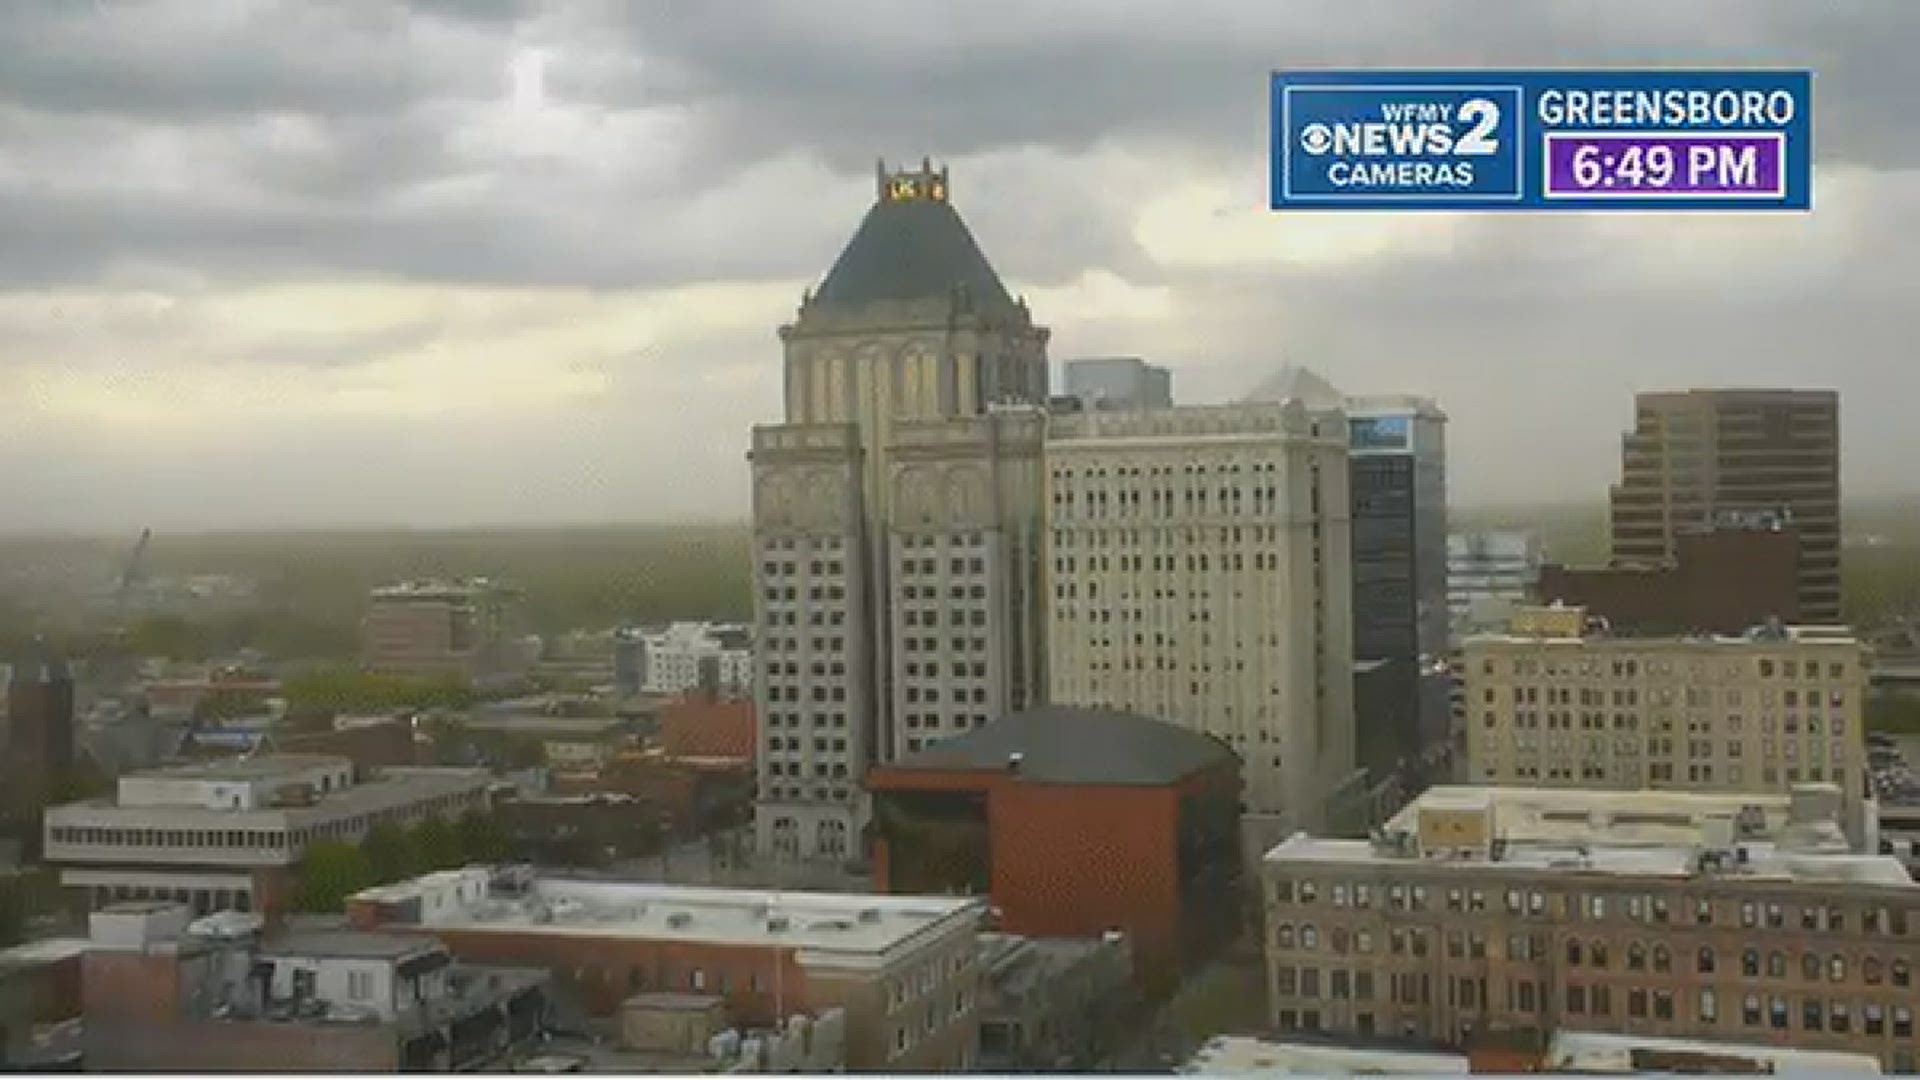 The WFMY News 2 Skycam captured a pollen cloud explosion in Greensboro as high winds of 40-50 mph moved through the city ahead of a thunderstorm that never came.